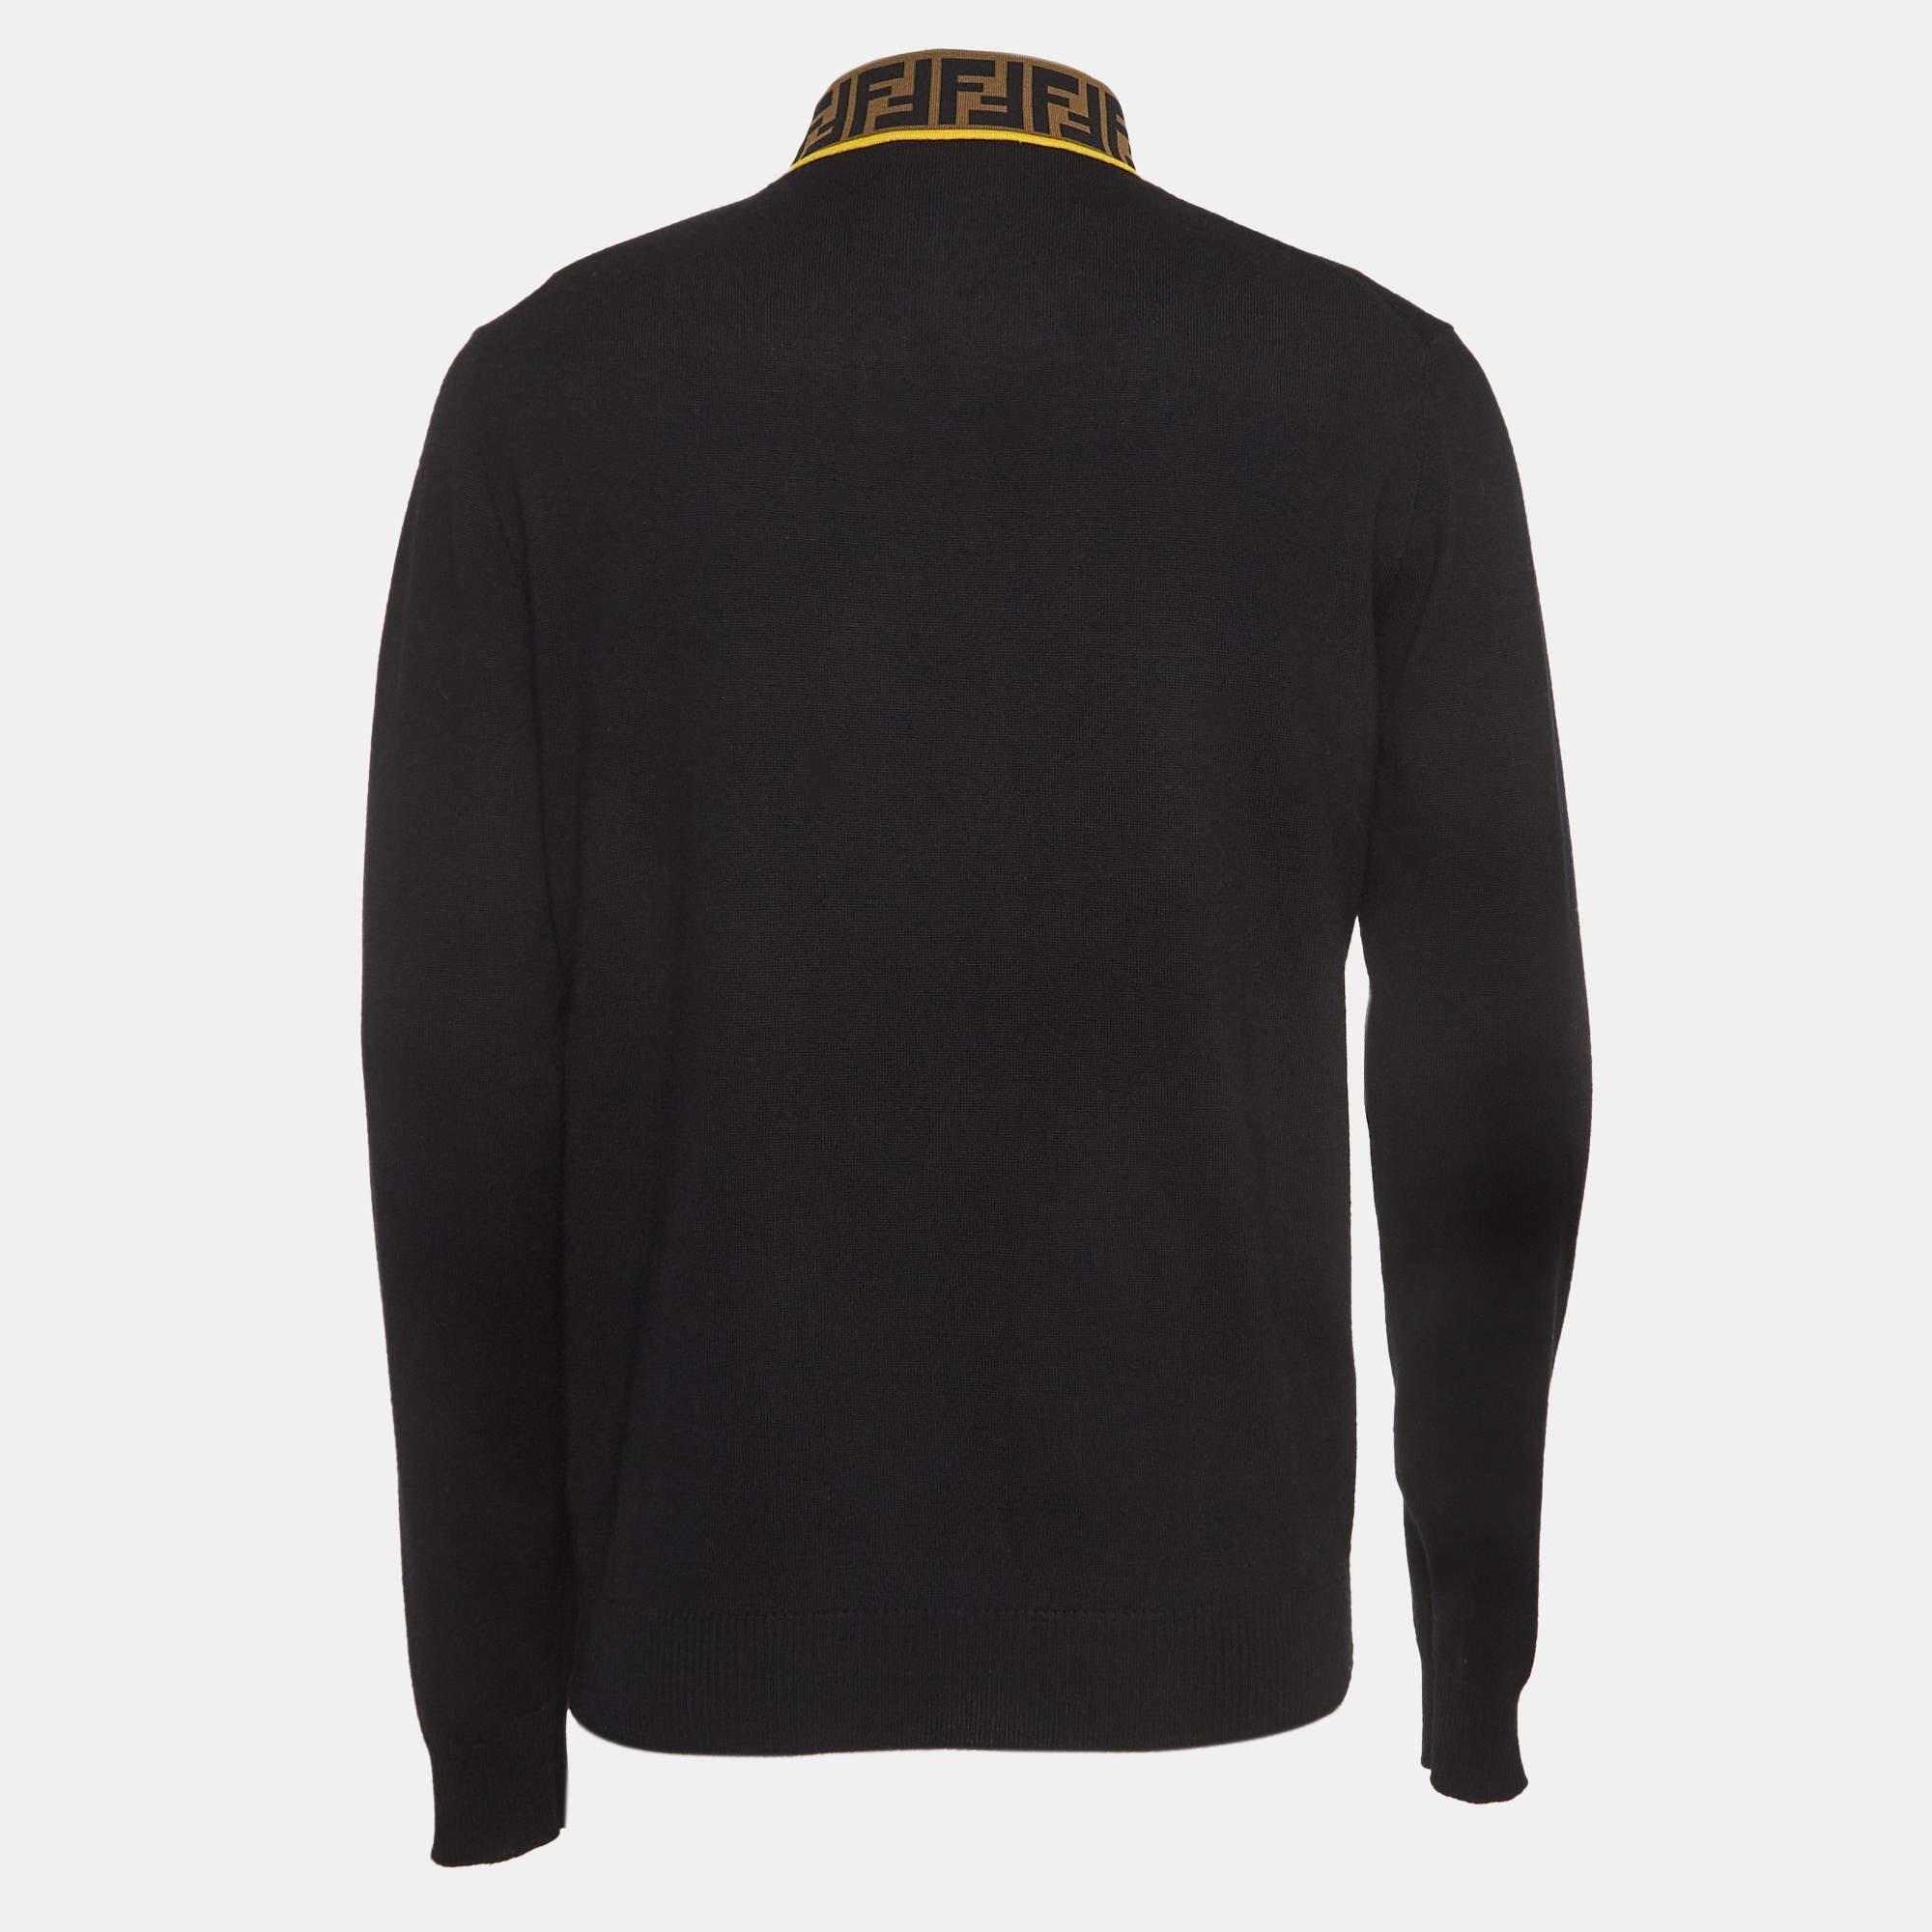 Let the latest addition to your closet be this Fendi pullover for men. Meticulously tailored and effortlessly chic, it's a versatile wardrobe staple, perfect to pair with jeans as well as tailored pants.

